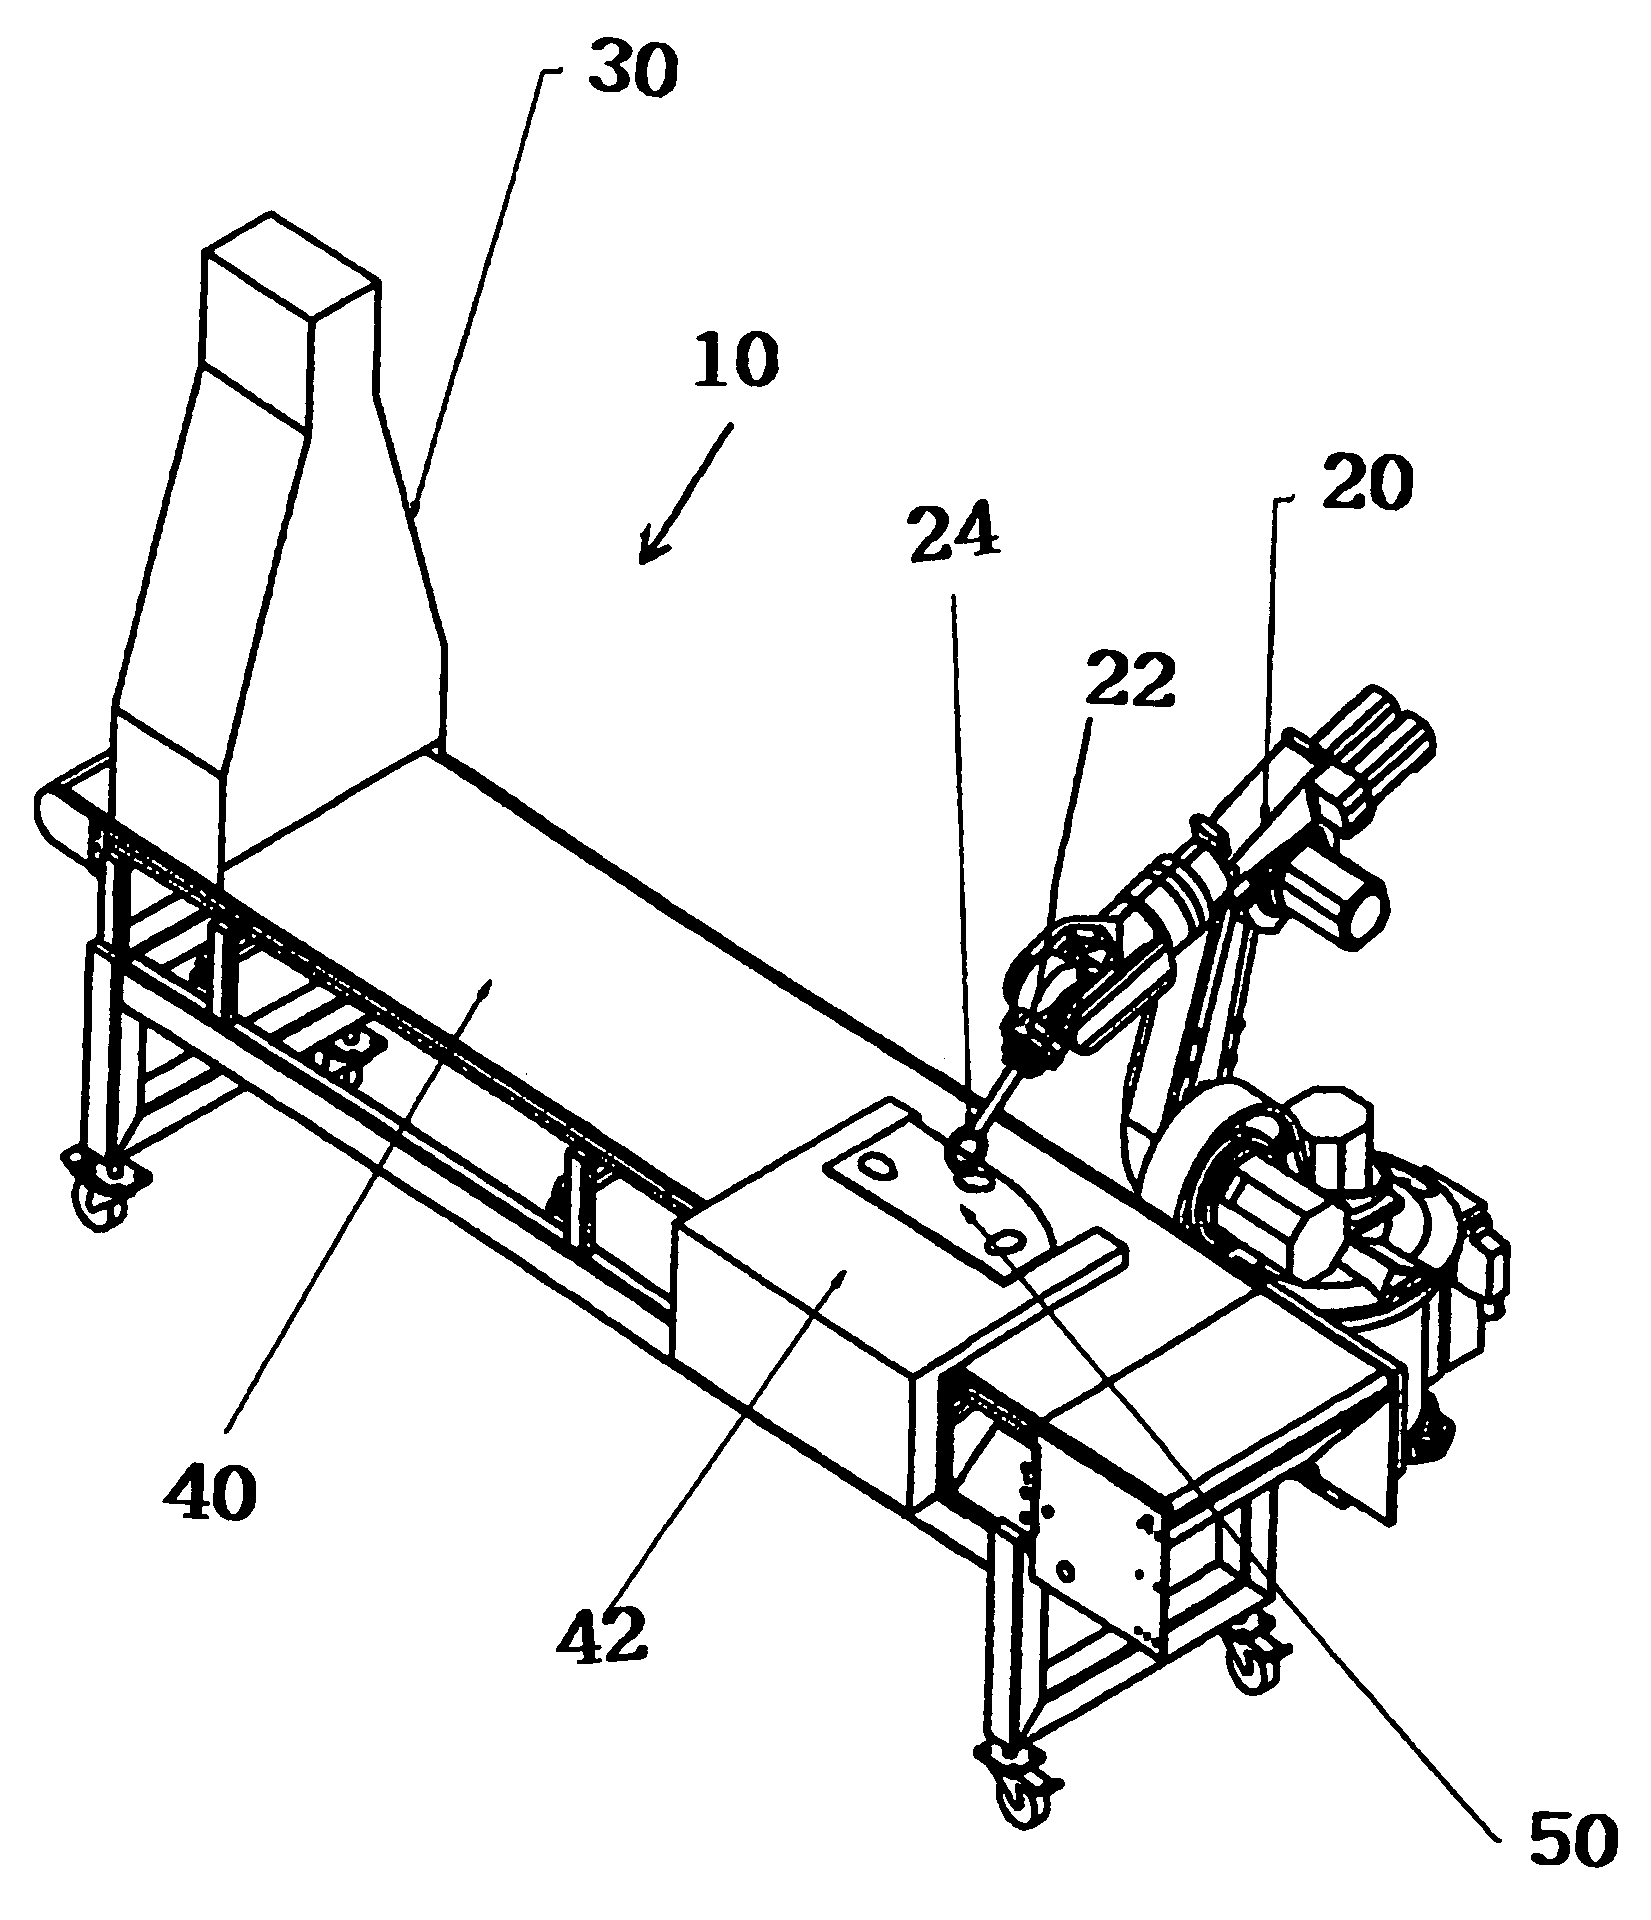 Method for de-rinding and trimming a piece of meat or a piece of slaughtered animal